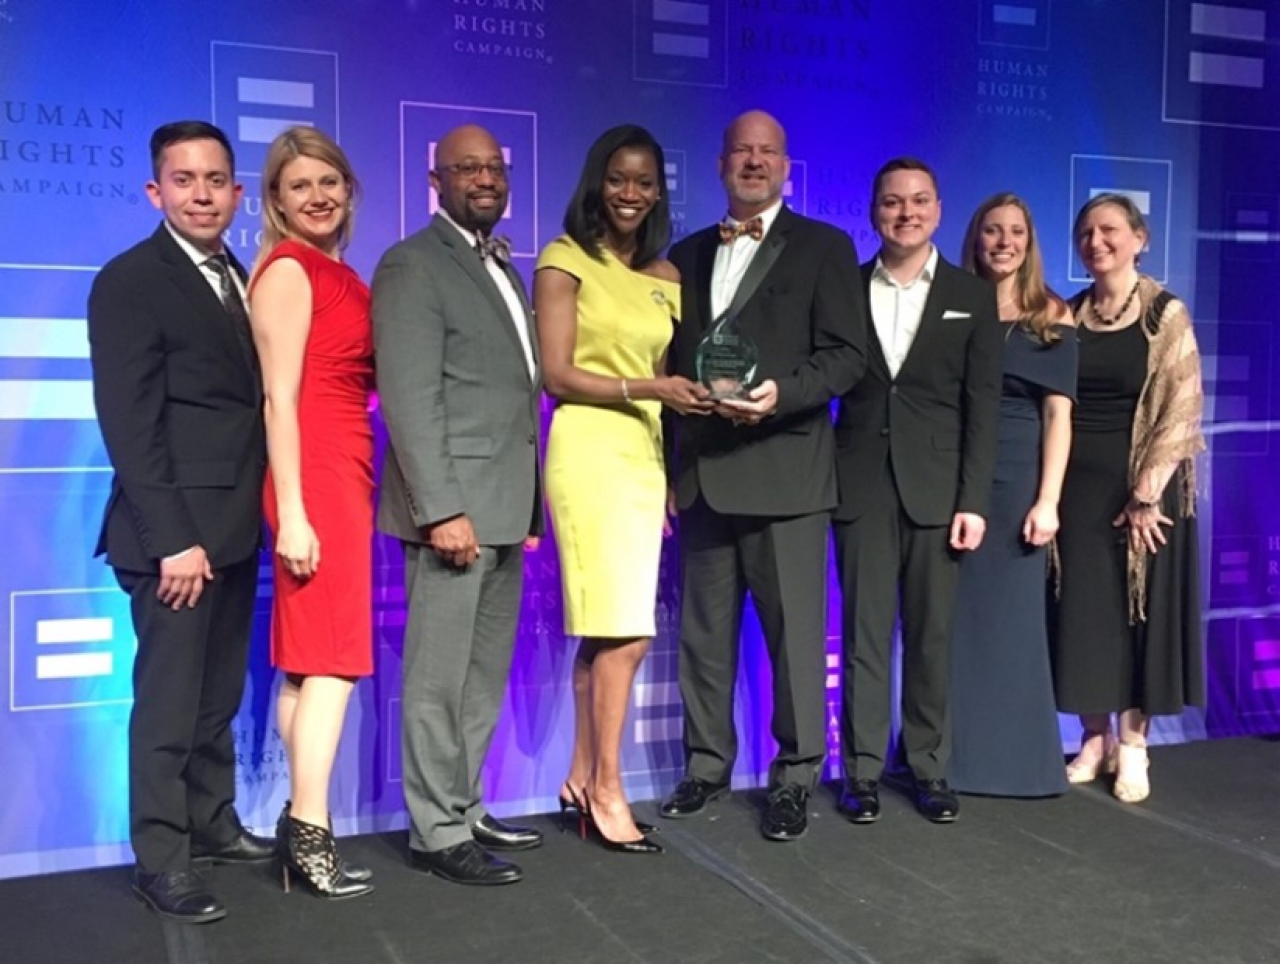 Spectra team accepting 2019 HRC Corporate Equality Aware at Western NY HRC Dinner